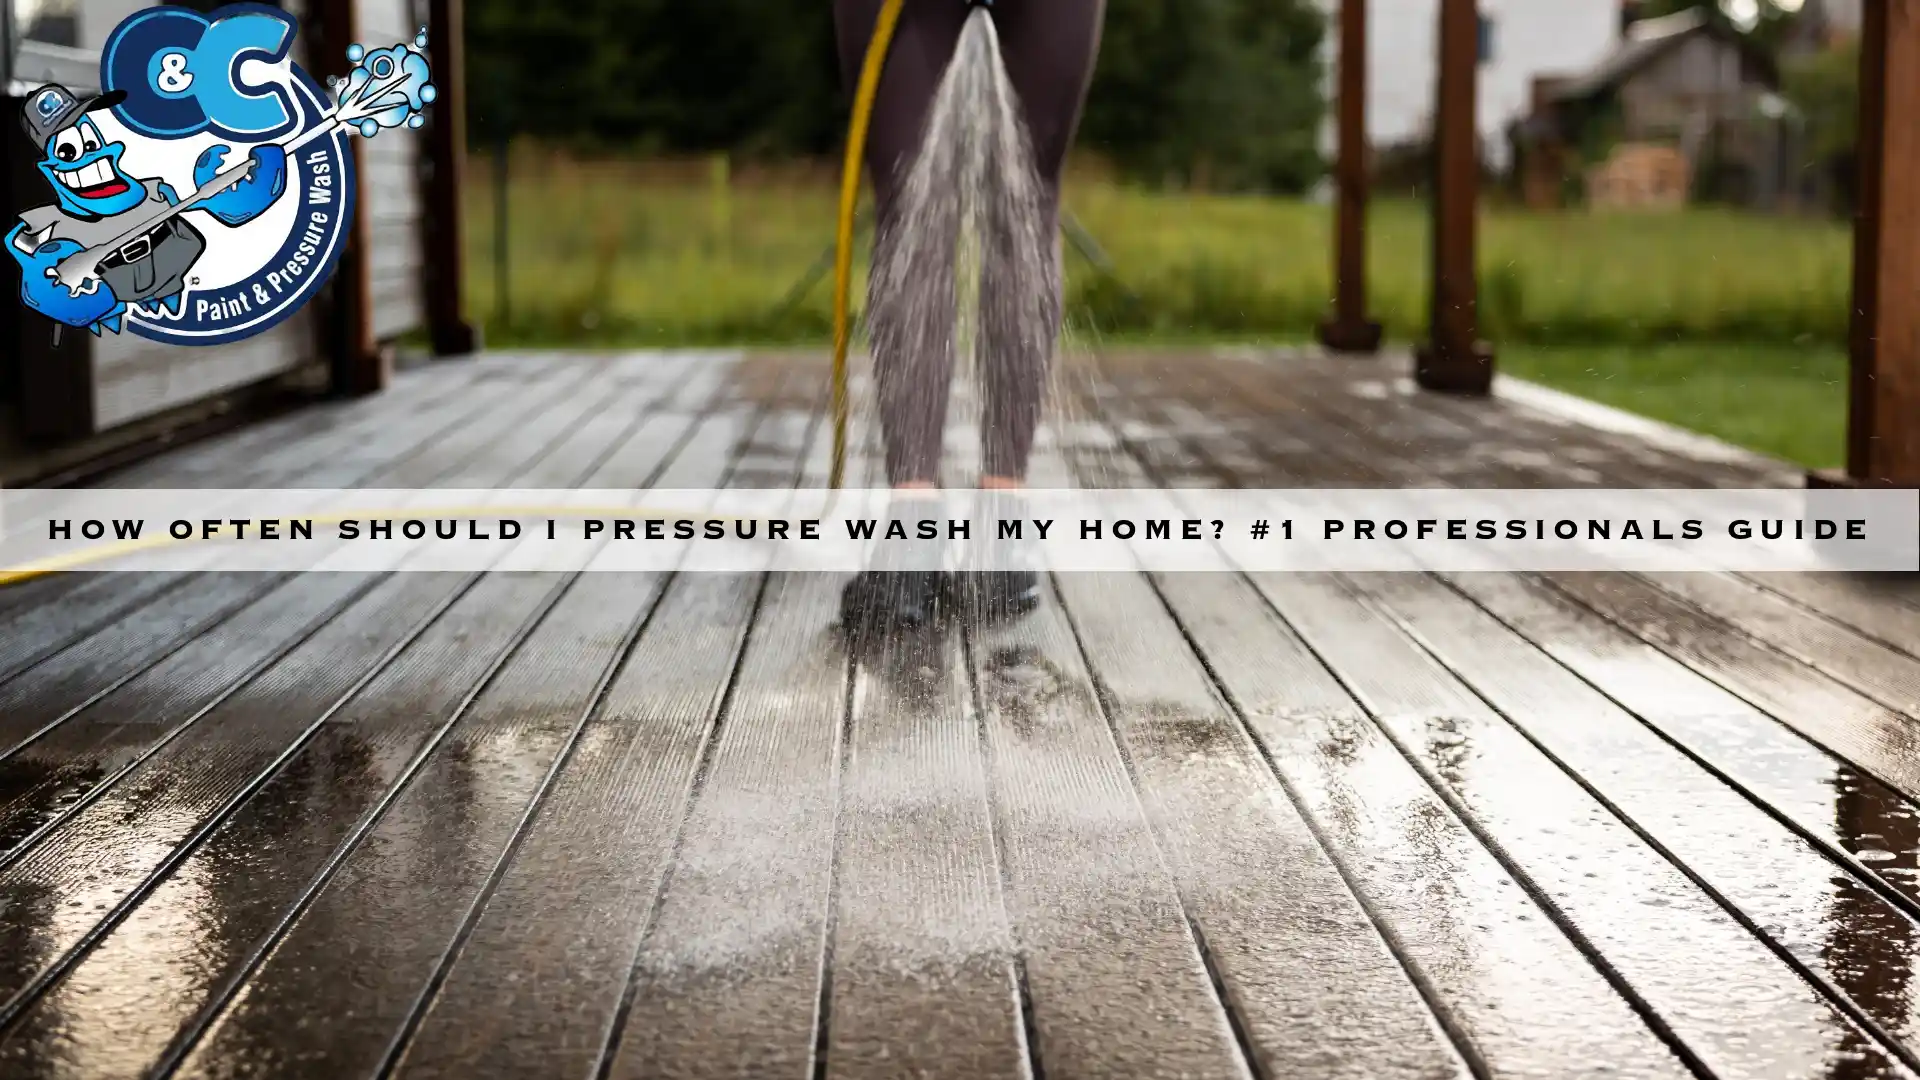 How Often Should I Pressure Wash My Home? #1 Professionals Guide